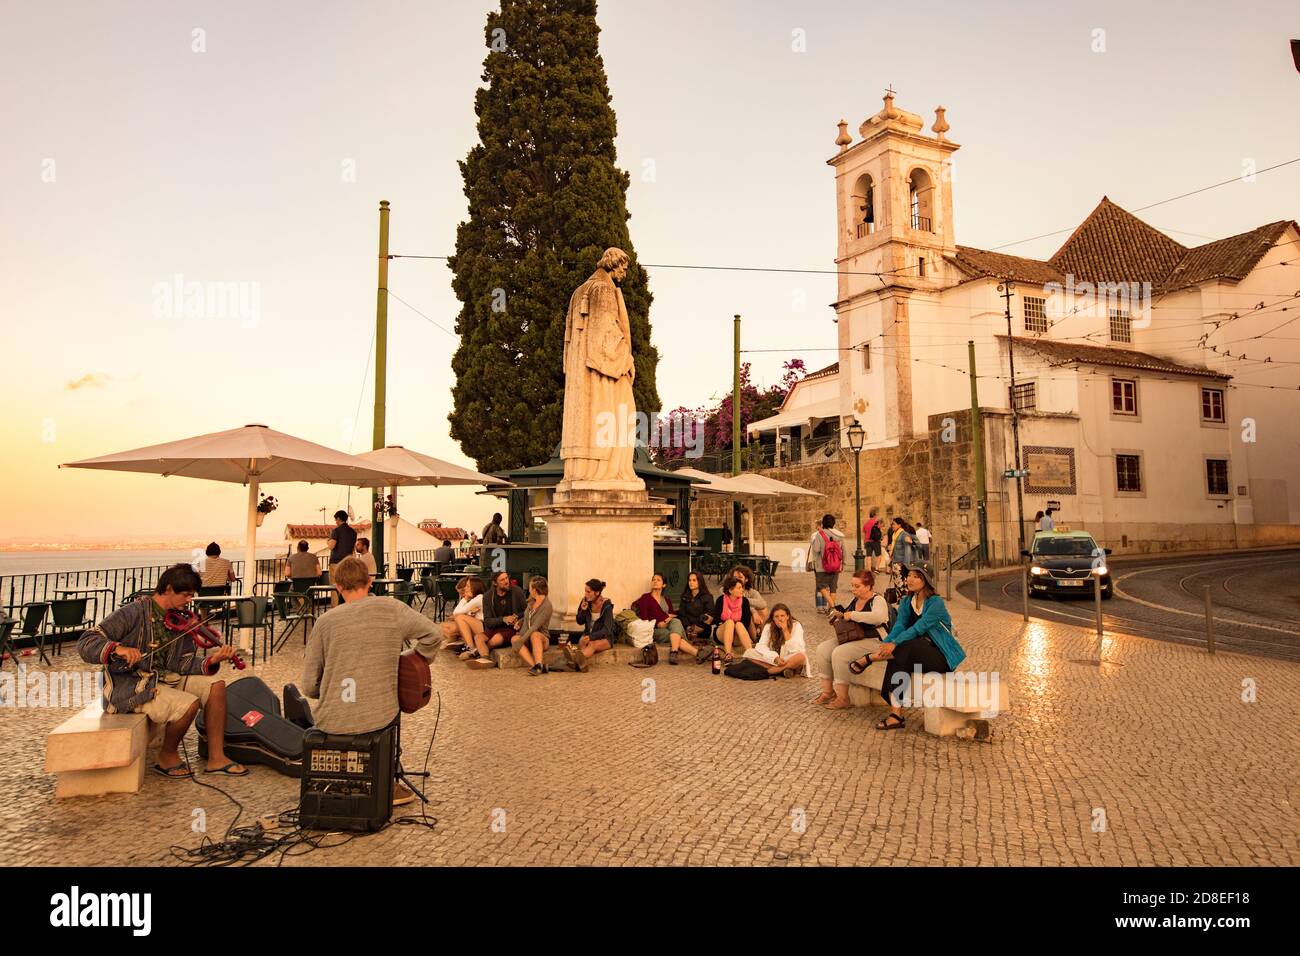 Public square with street musicians in front of the church of Santa Luzia in the Alfama neighborhood of Lisbon, Portugal, Europe. Stock Photo